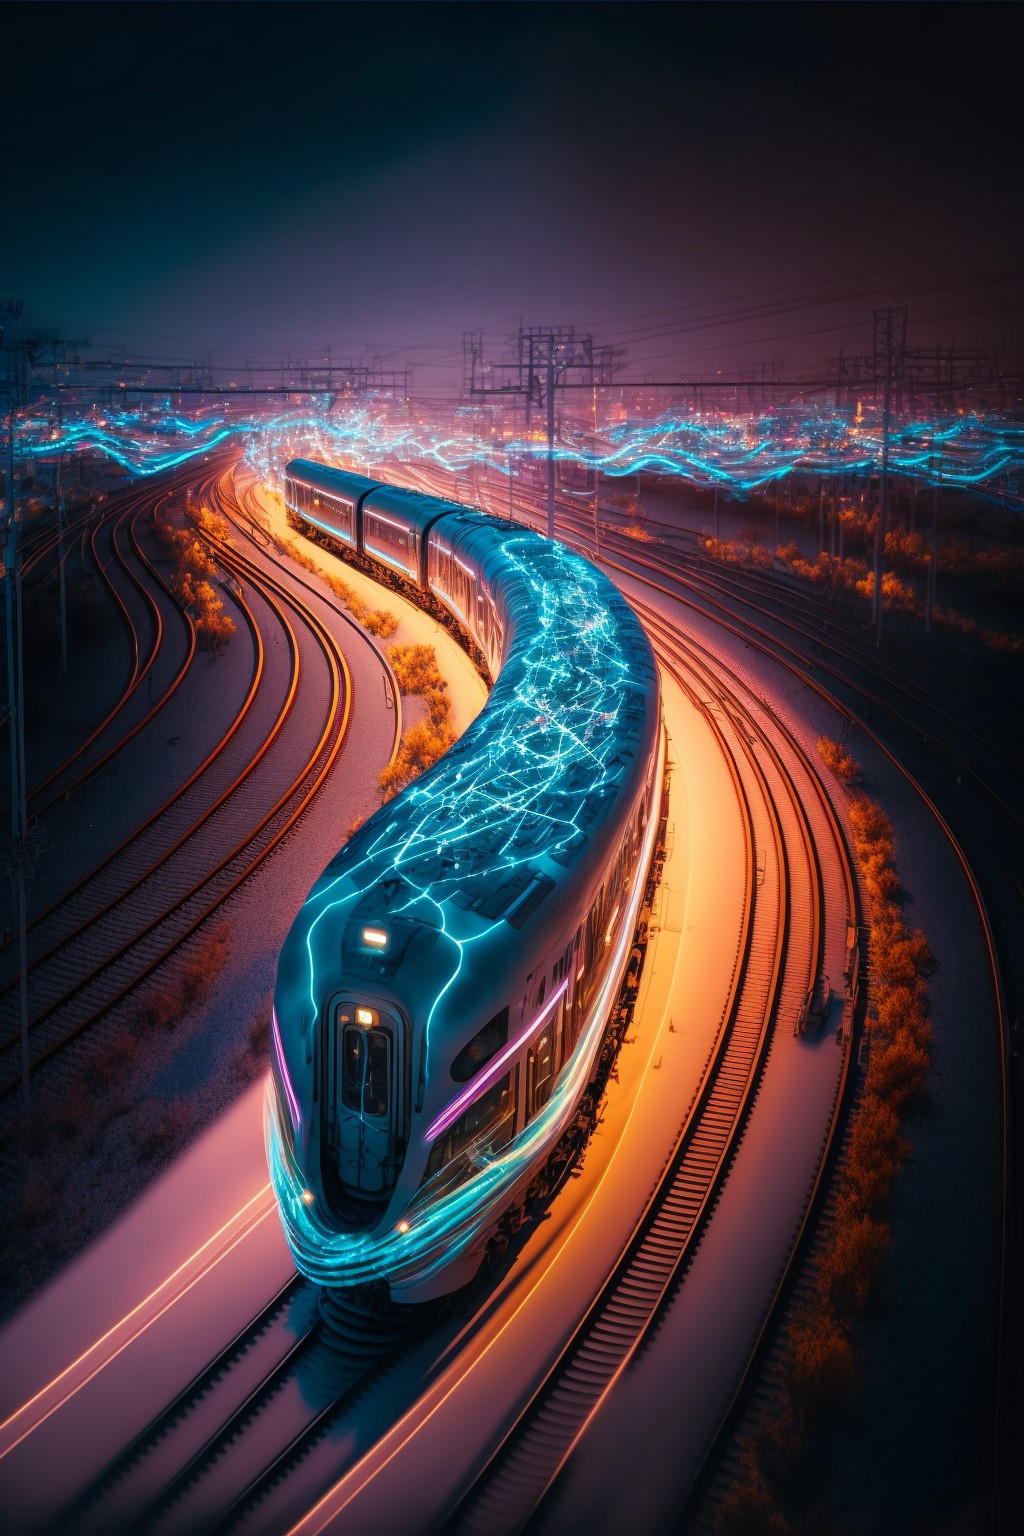 Time-lapse photography of speeding high-speed trains